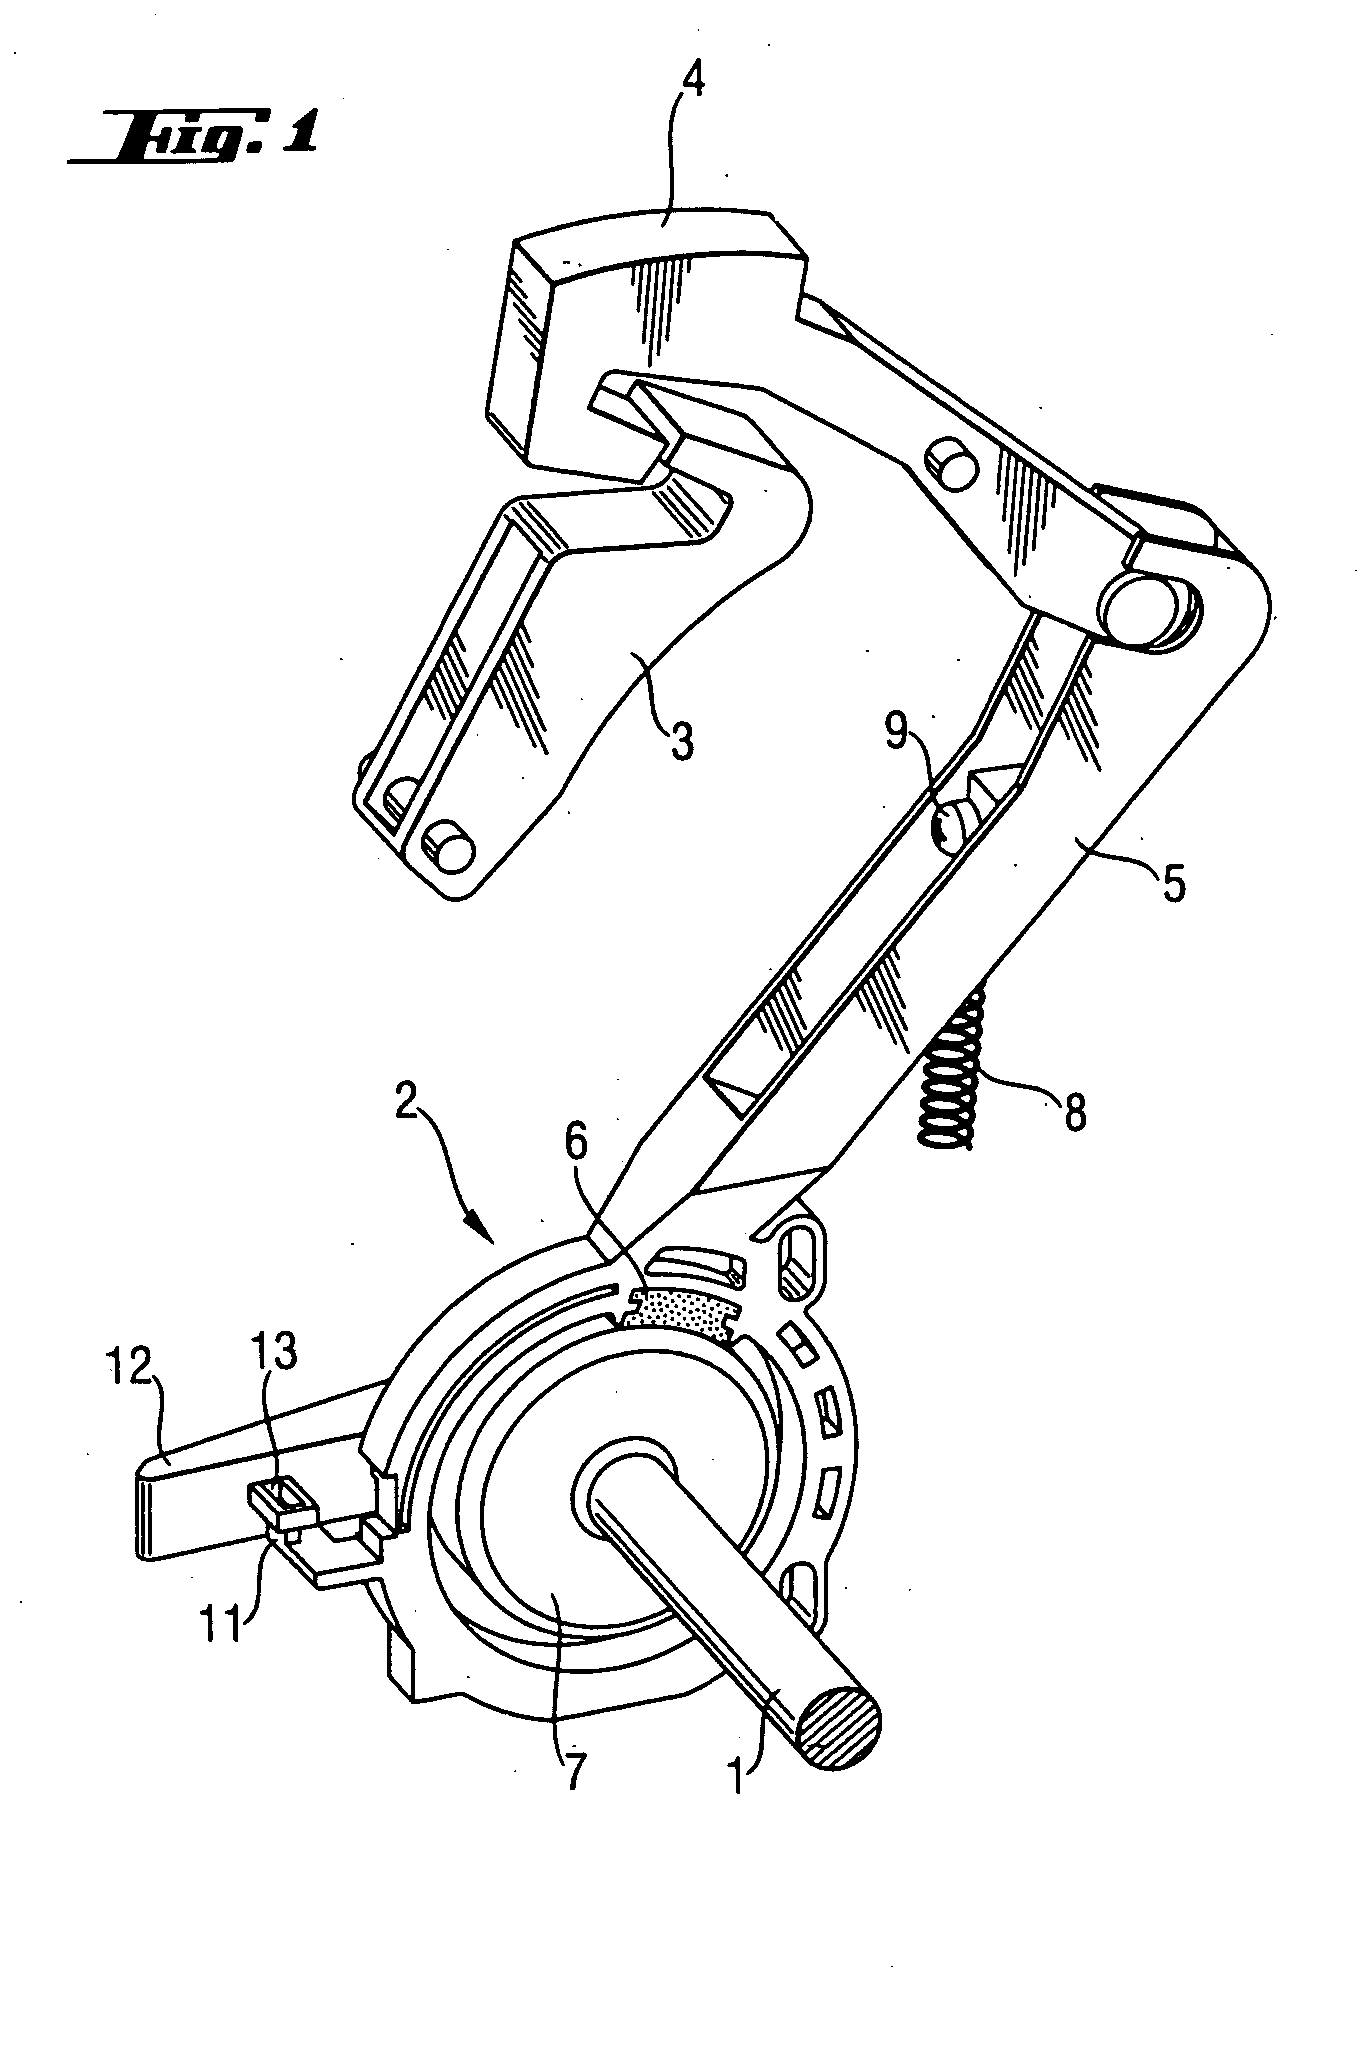 Electric power tool with locking mechanism